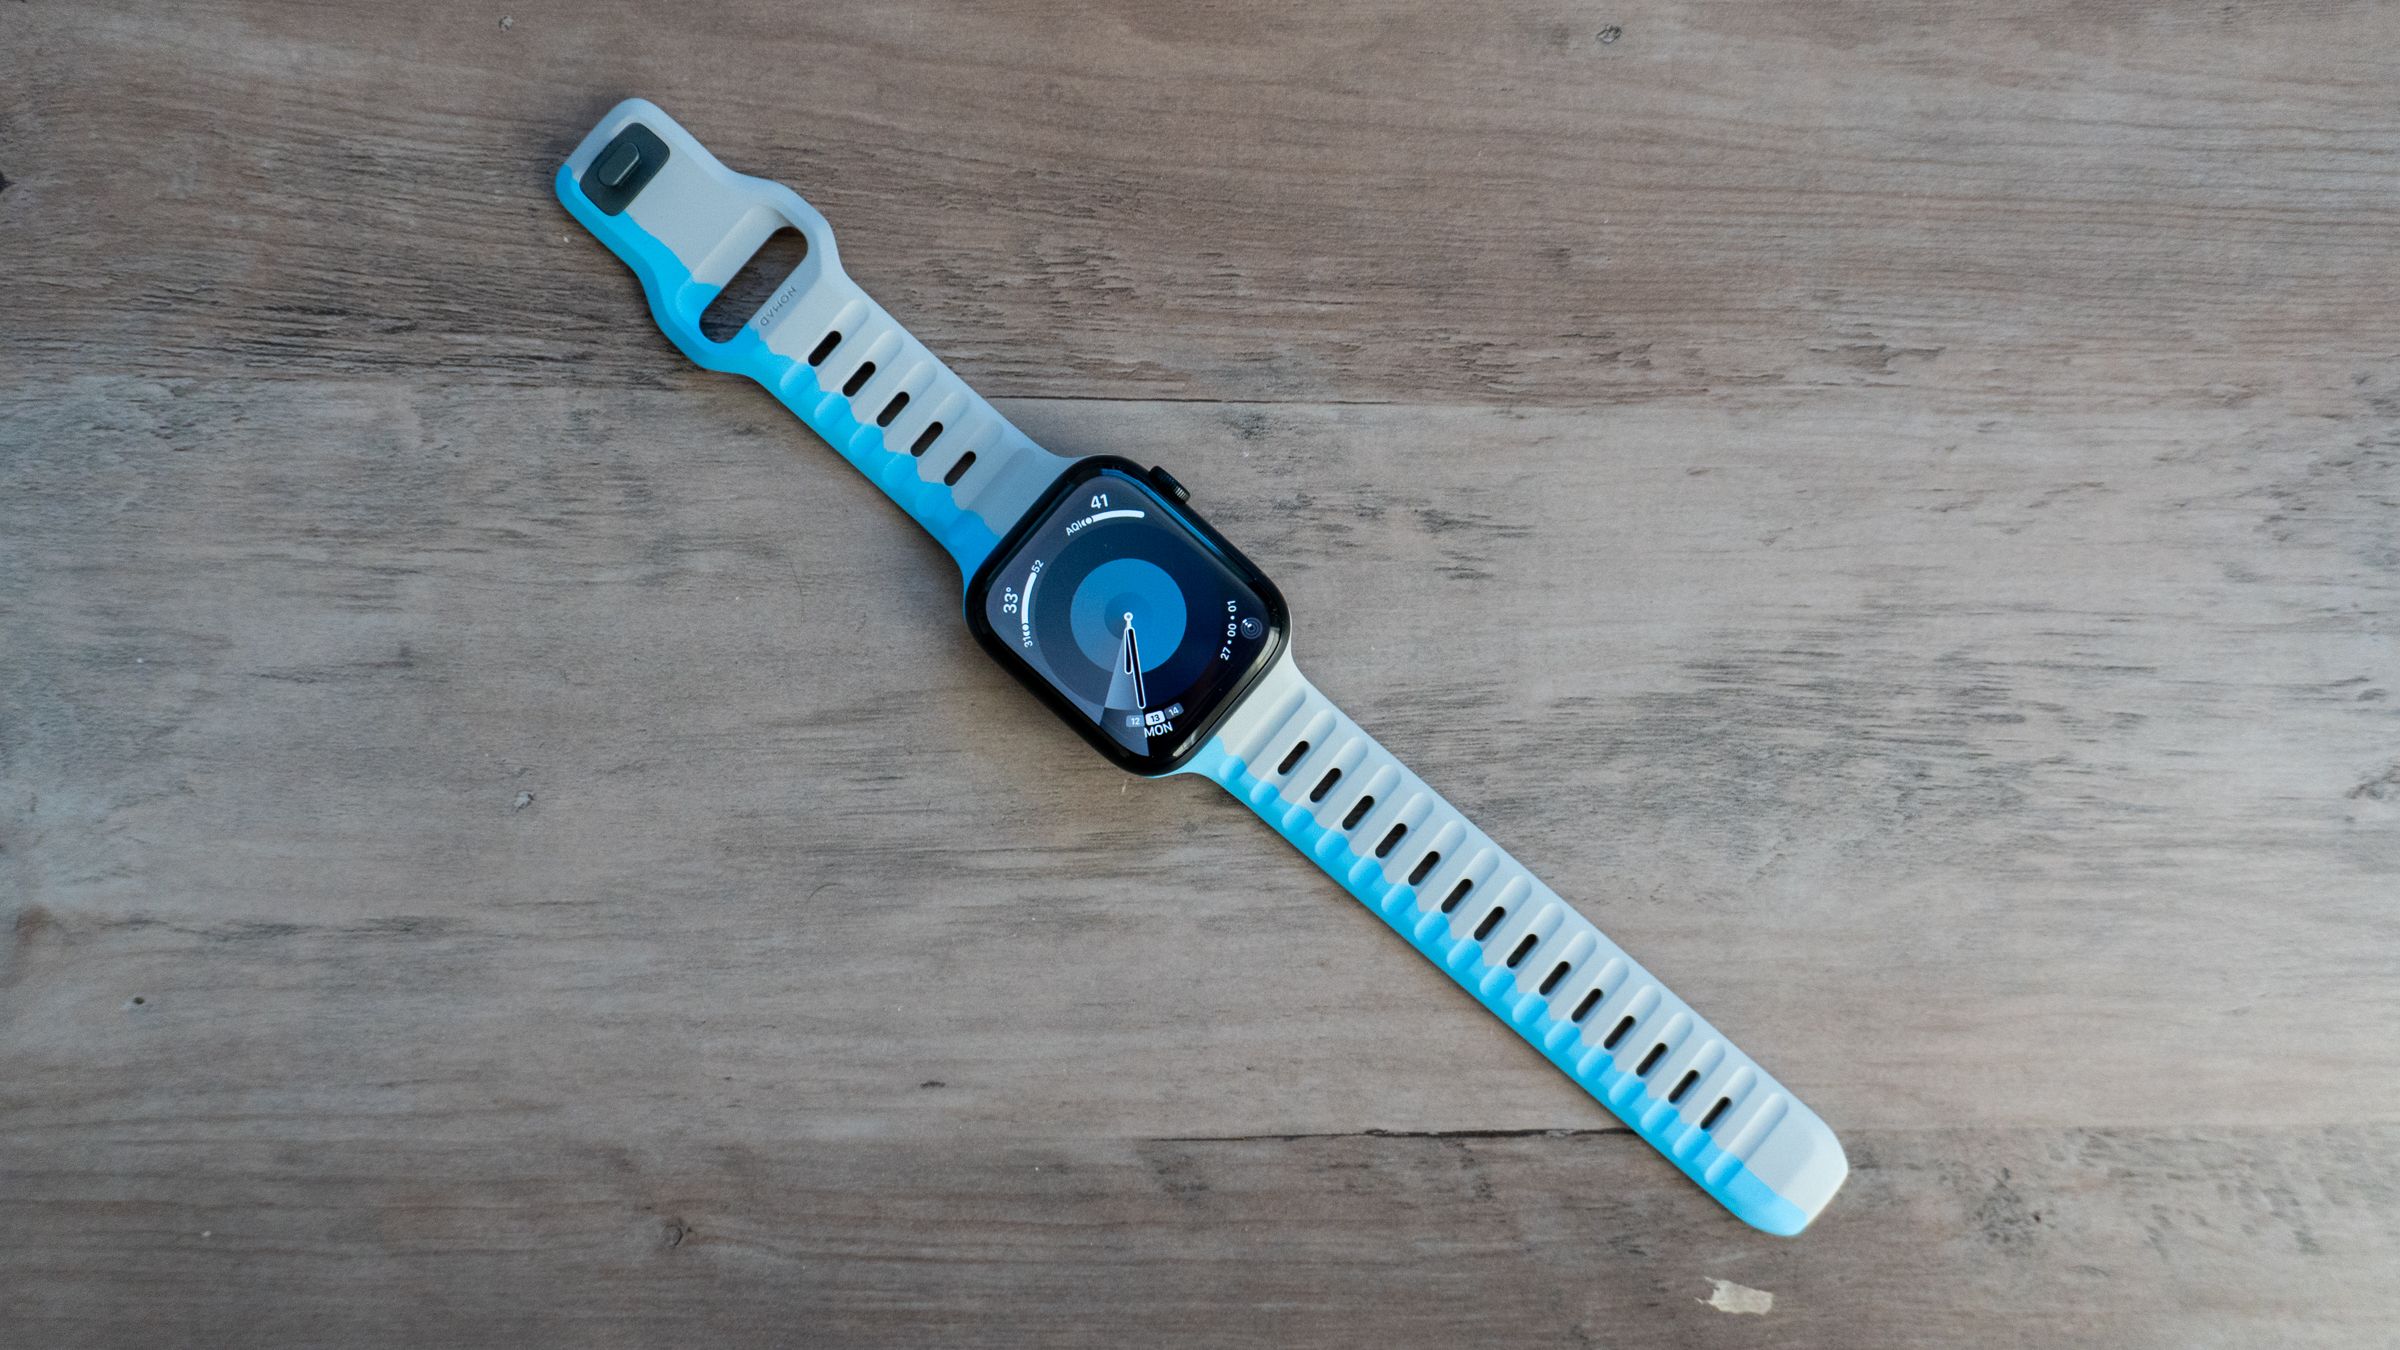 Nomad Strike Sport Apple Watch band launch